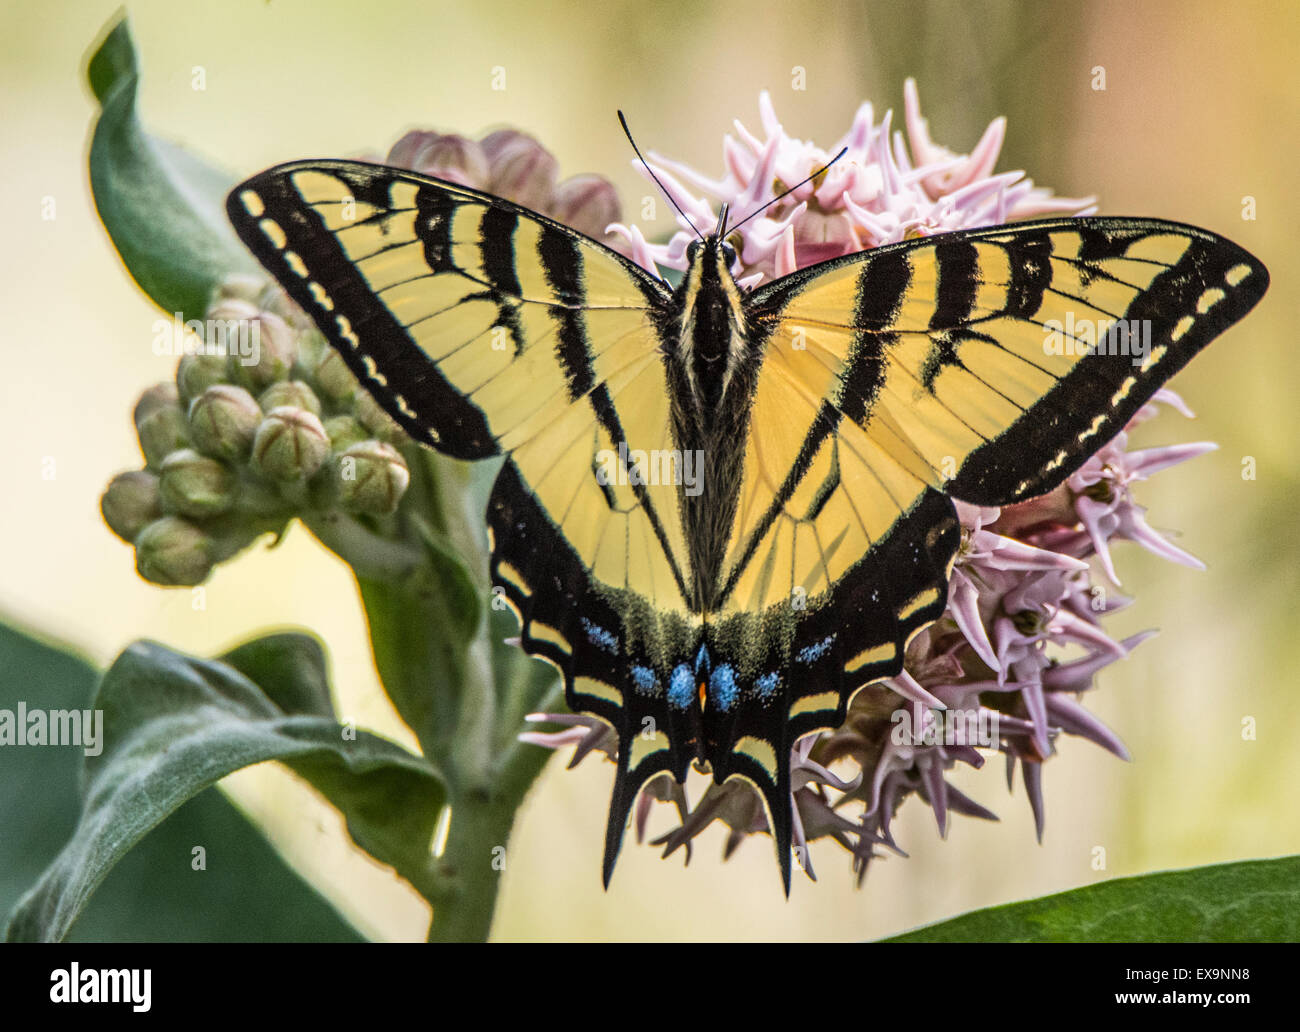 Butterflies, Eastern Tiger Swallowtail Butterfly feeding off nector from Bloomimg Common Milkweed plant. Idaho, USA Stock Photo